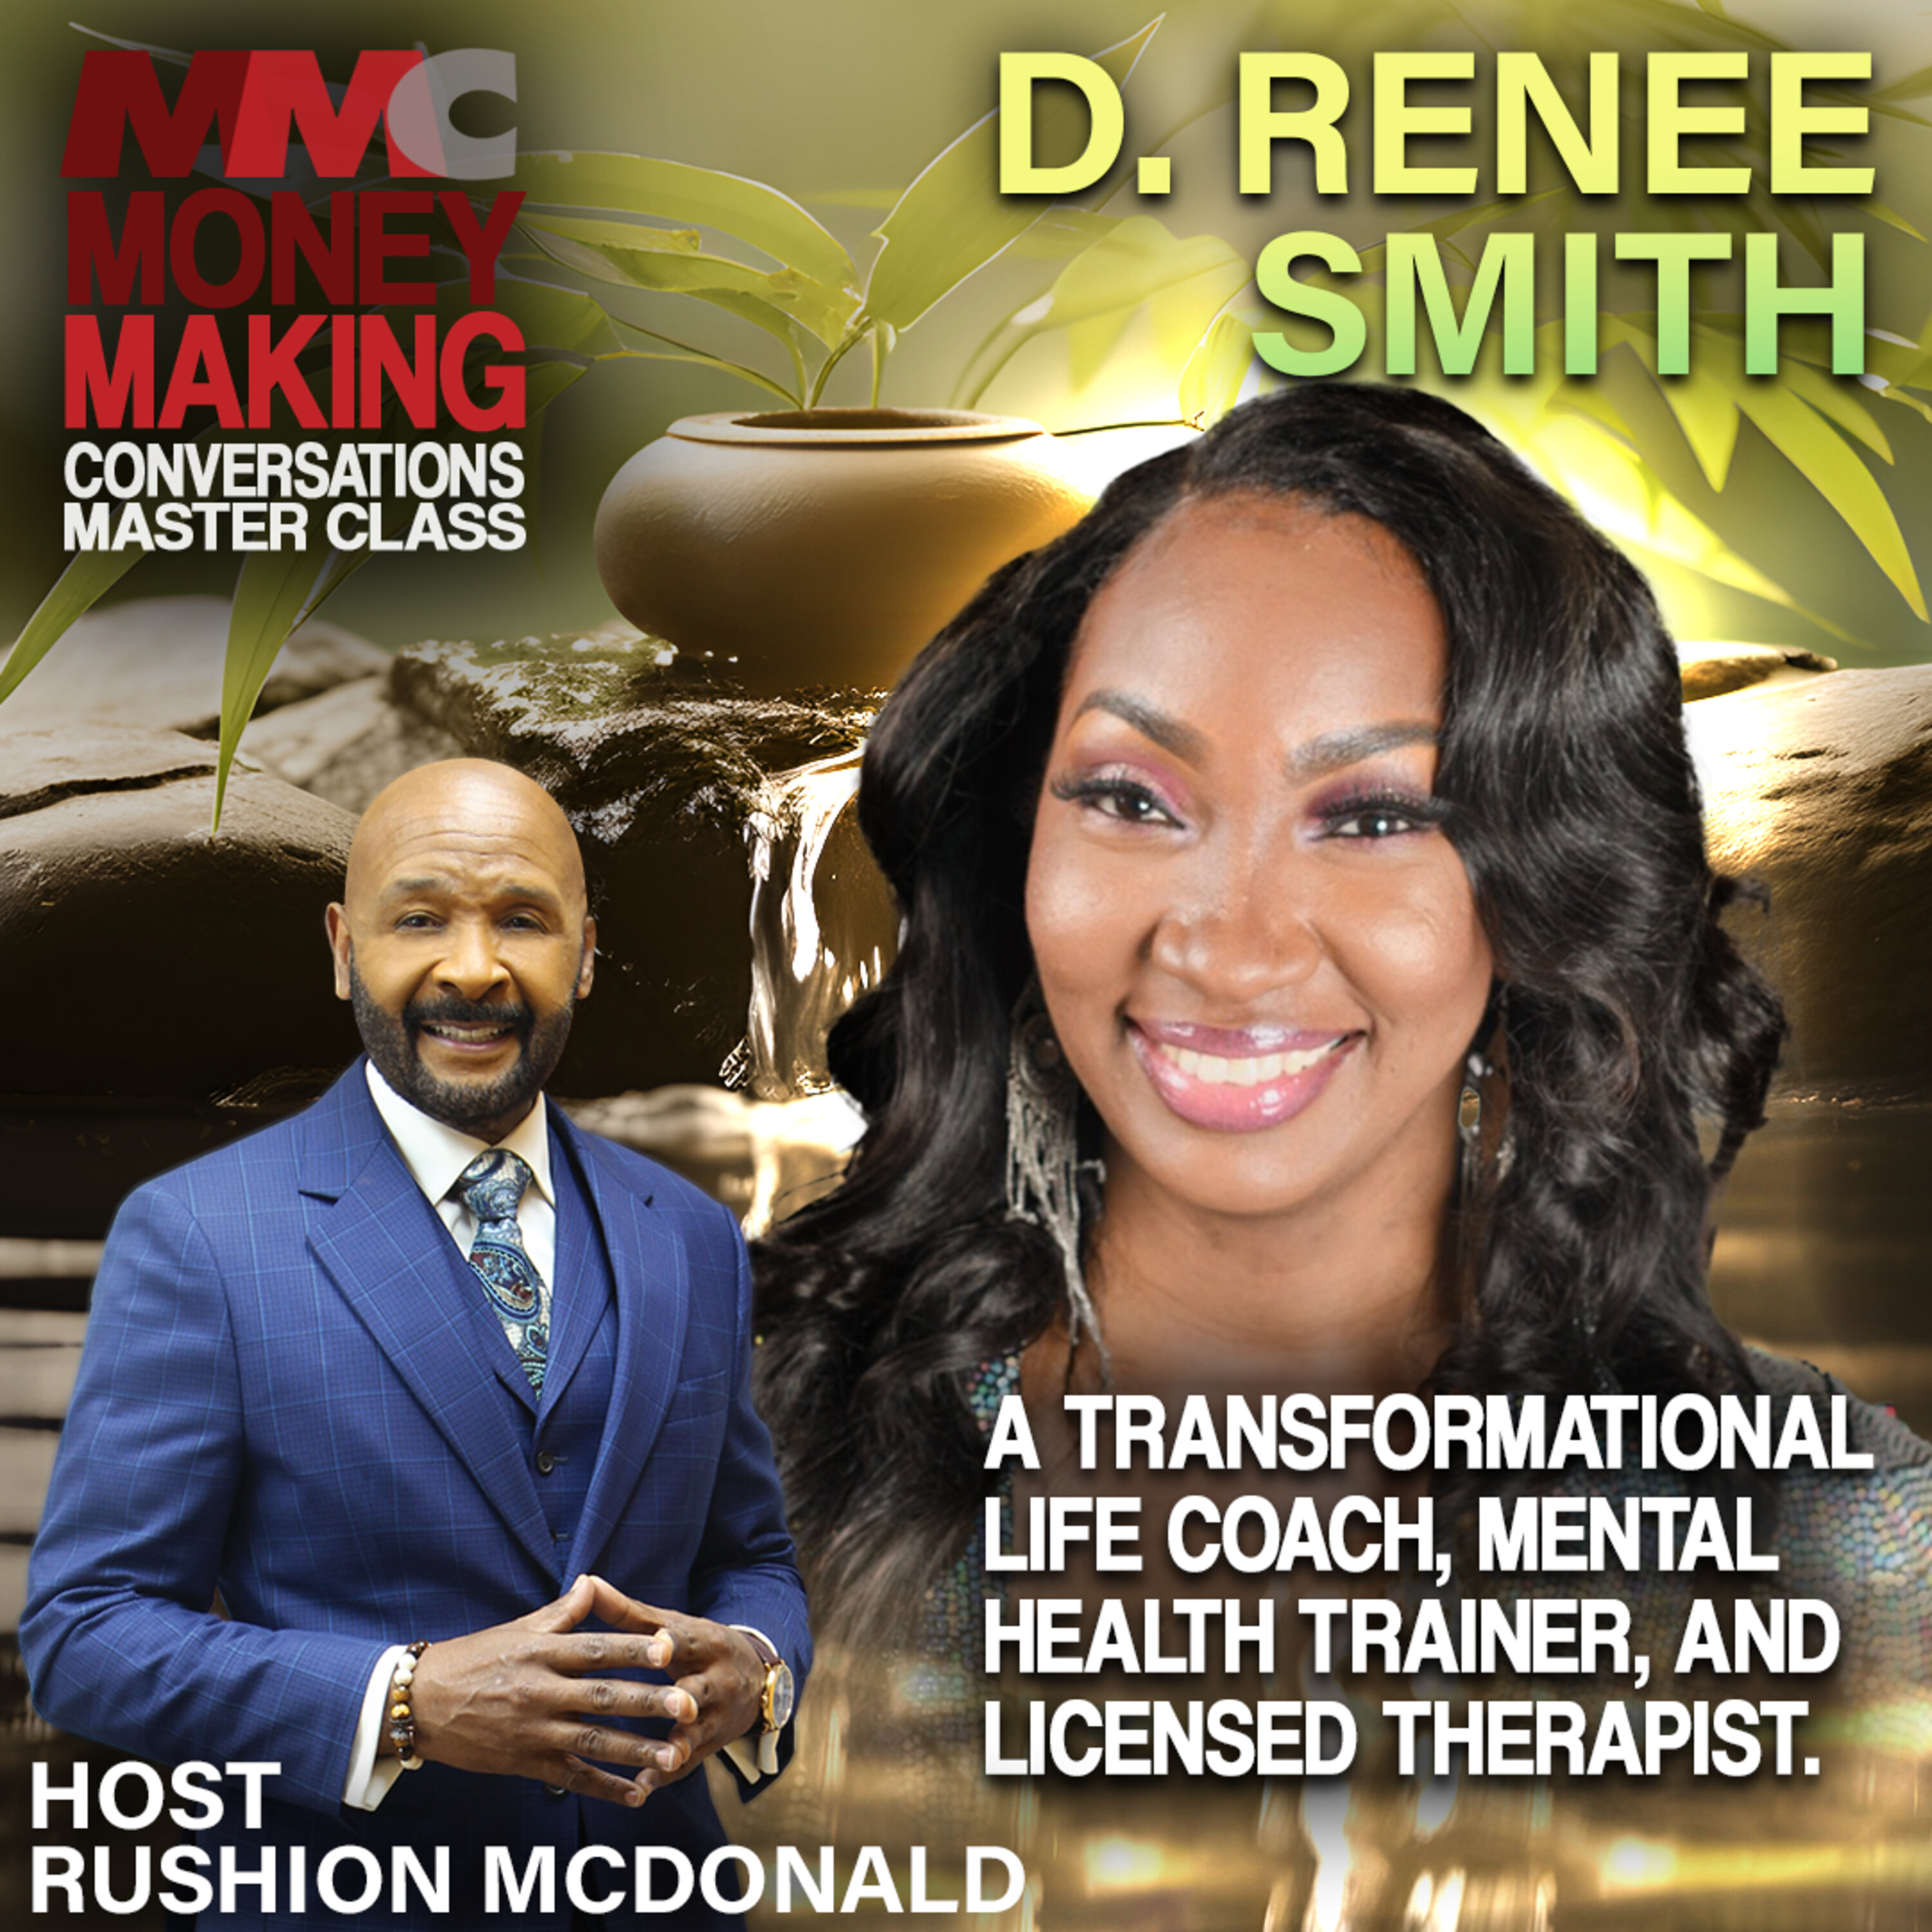 A transformational life coach, Mental health trainer,  and Licensed therapist, D. Renee Smith .